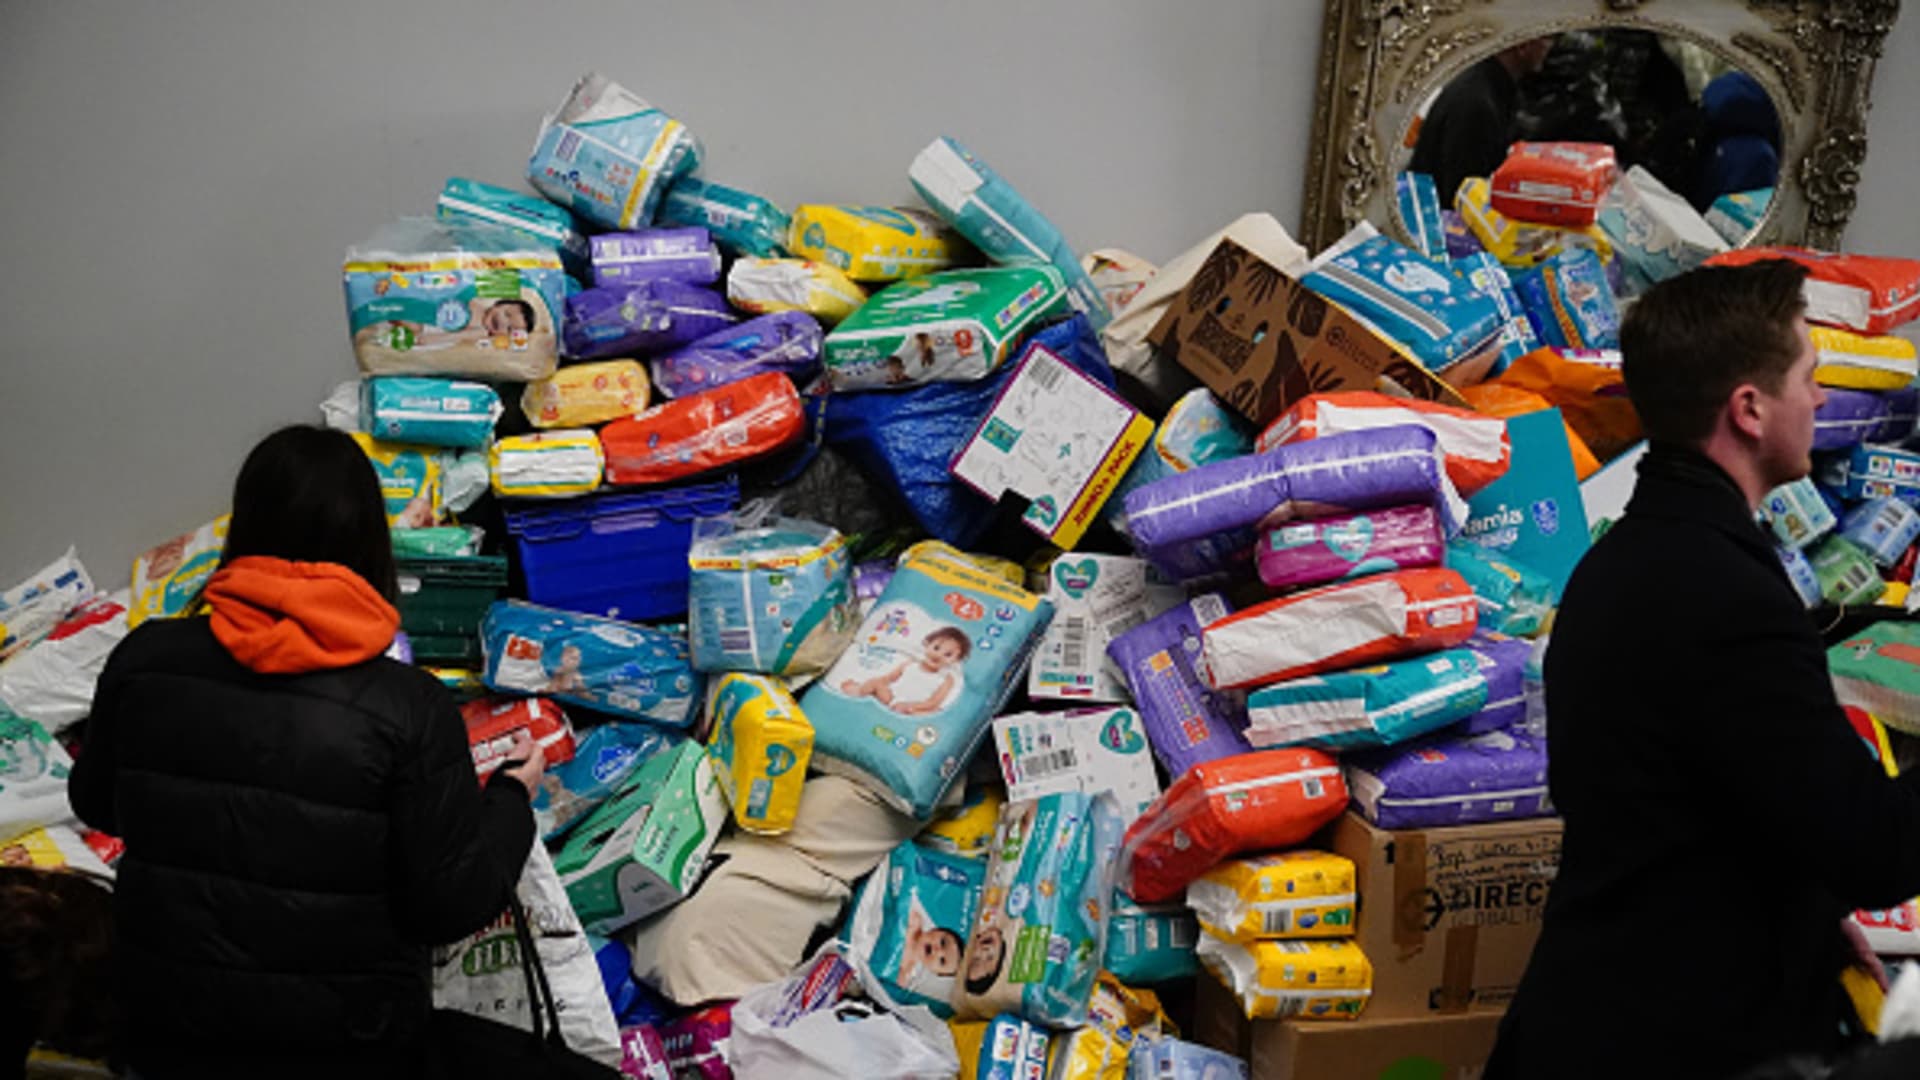 A large pile of nappies donated as aid for Ukrainian refugees at the Klub Orla Bialegoin Balham, south London, where it will be sorted before delivery overseas to those fleeing Ukraine following the Russian invasion.